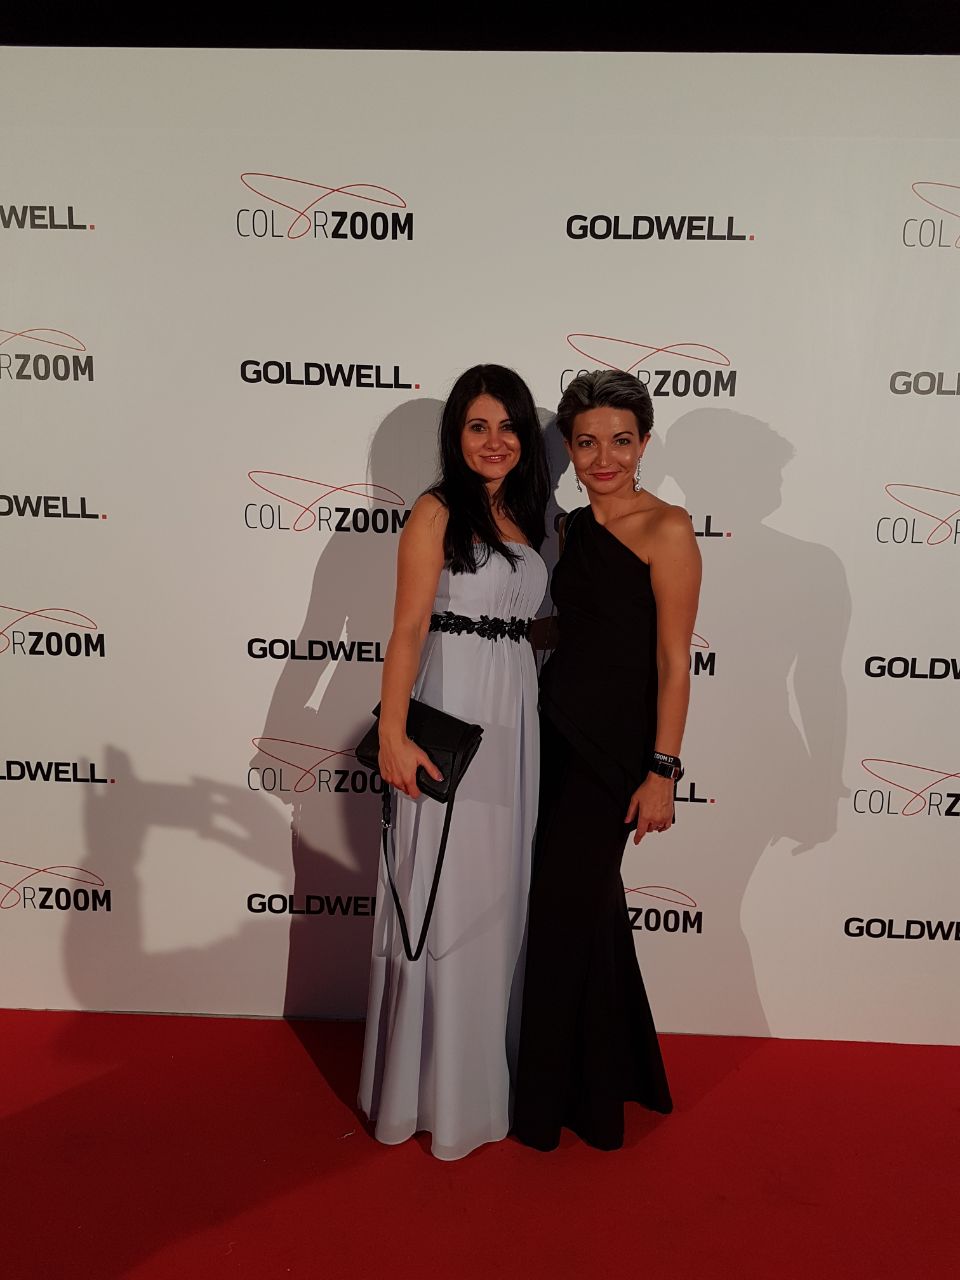 Goldwell Color Zoom